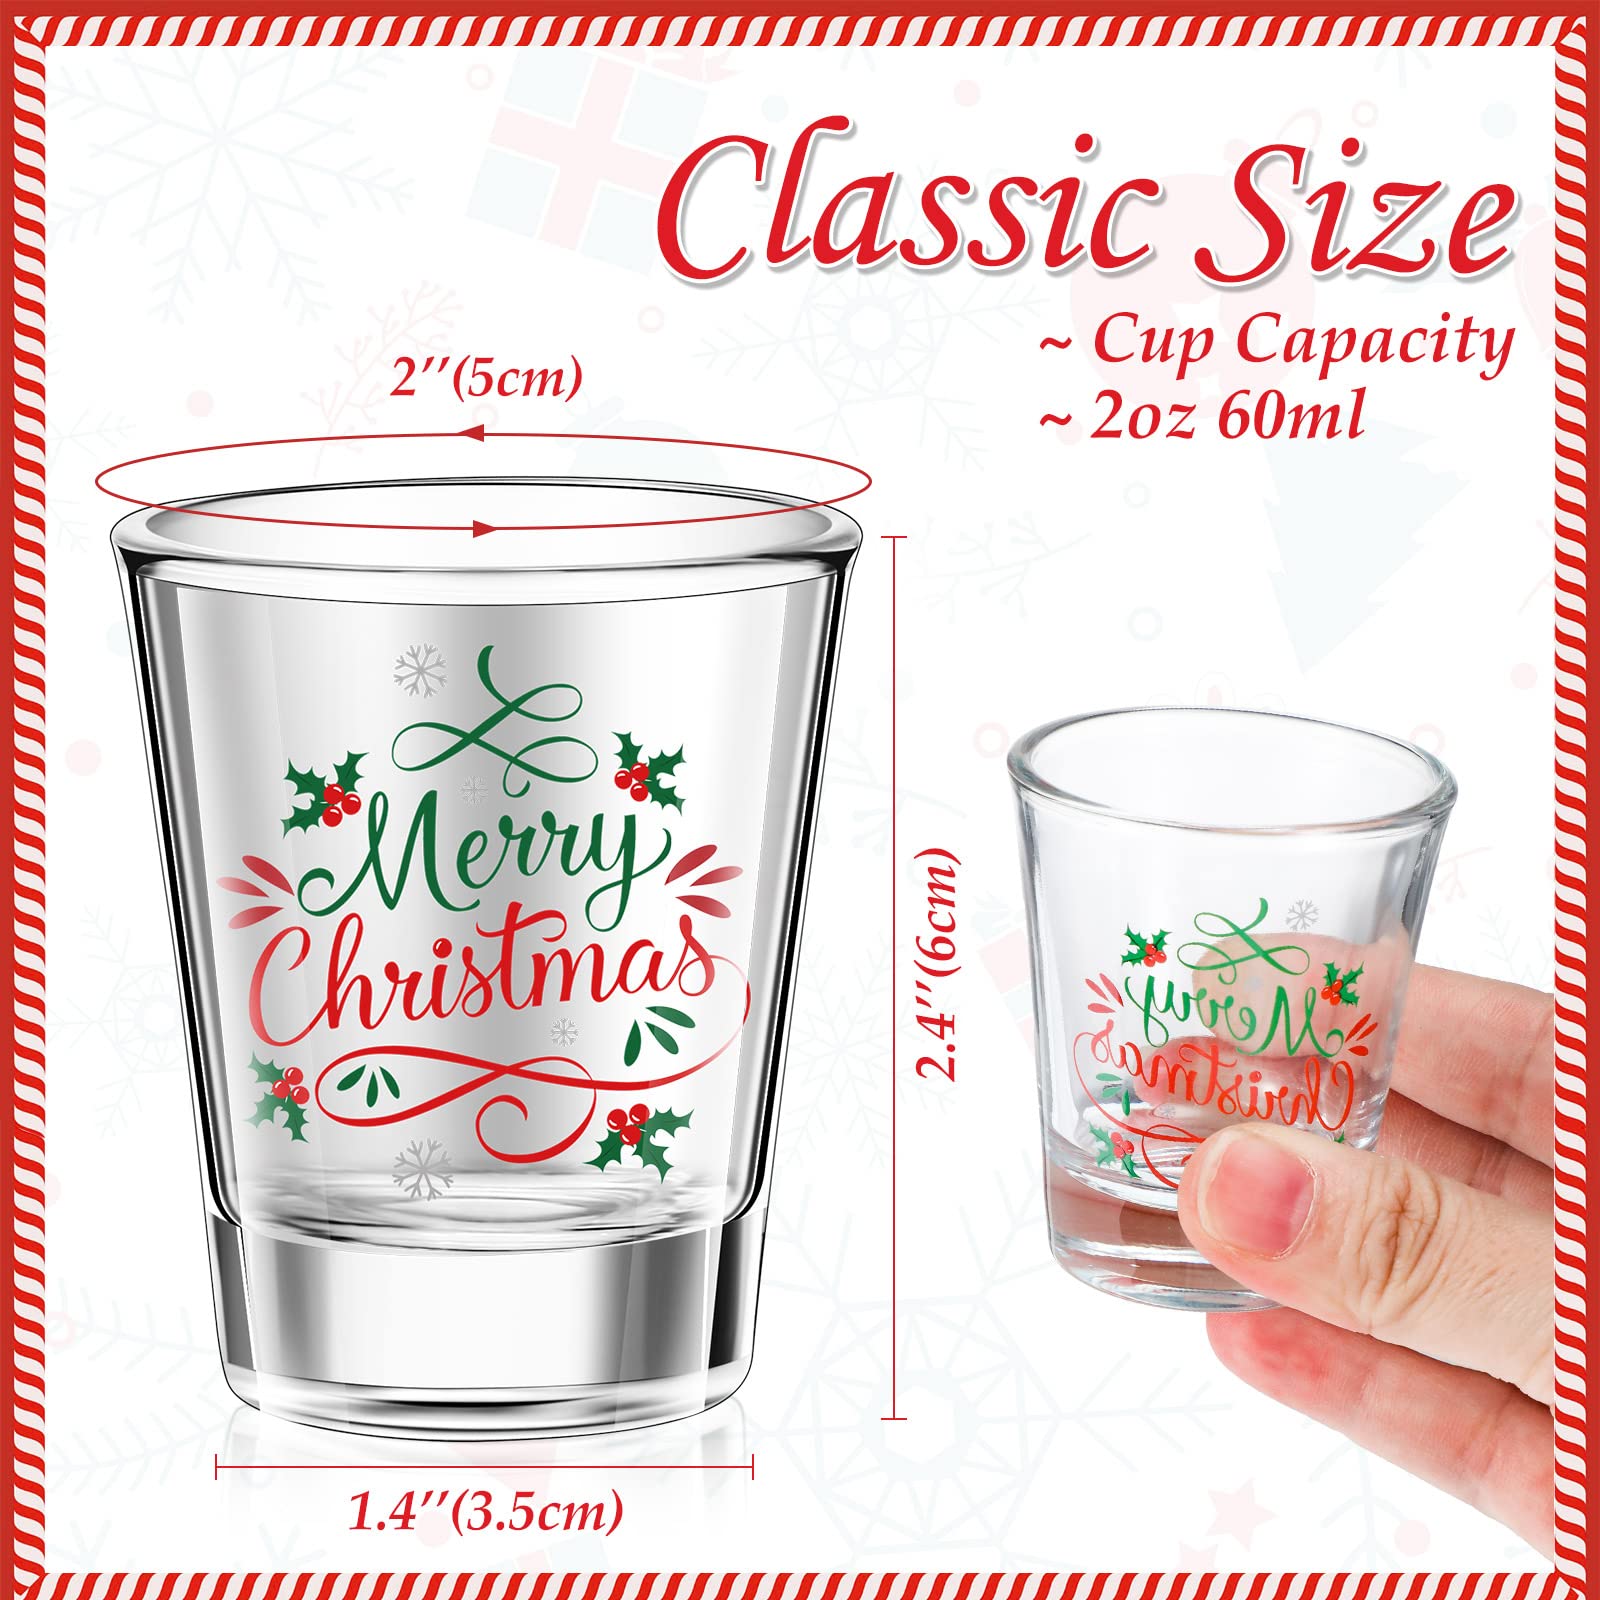 Lounsweer 6 Pcs Merry Christmas Shot Glass Set 2 oz Clear Holiday Cocktail Glasses Funny Shot Glasses Bulk, Cool Shot Cups with Weighty Base for Christmas Party Decoration Whiskey Drinkware Supply